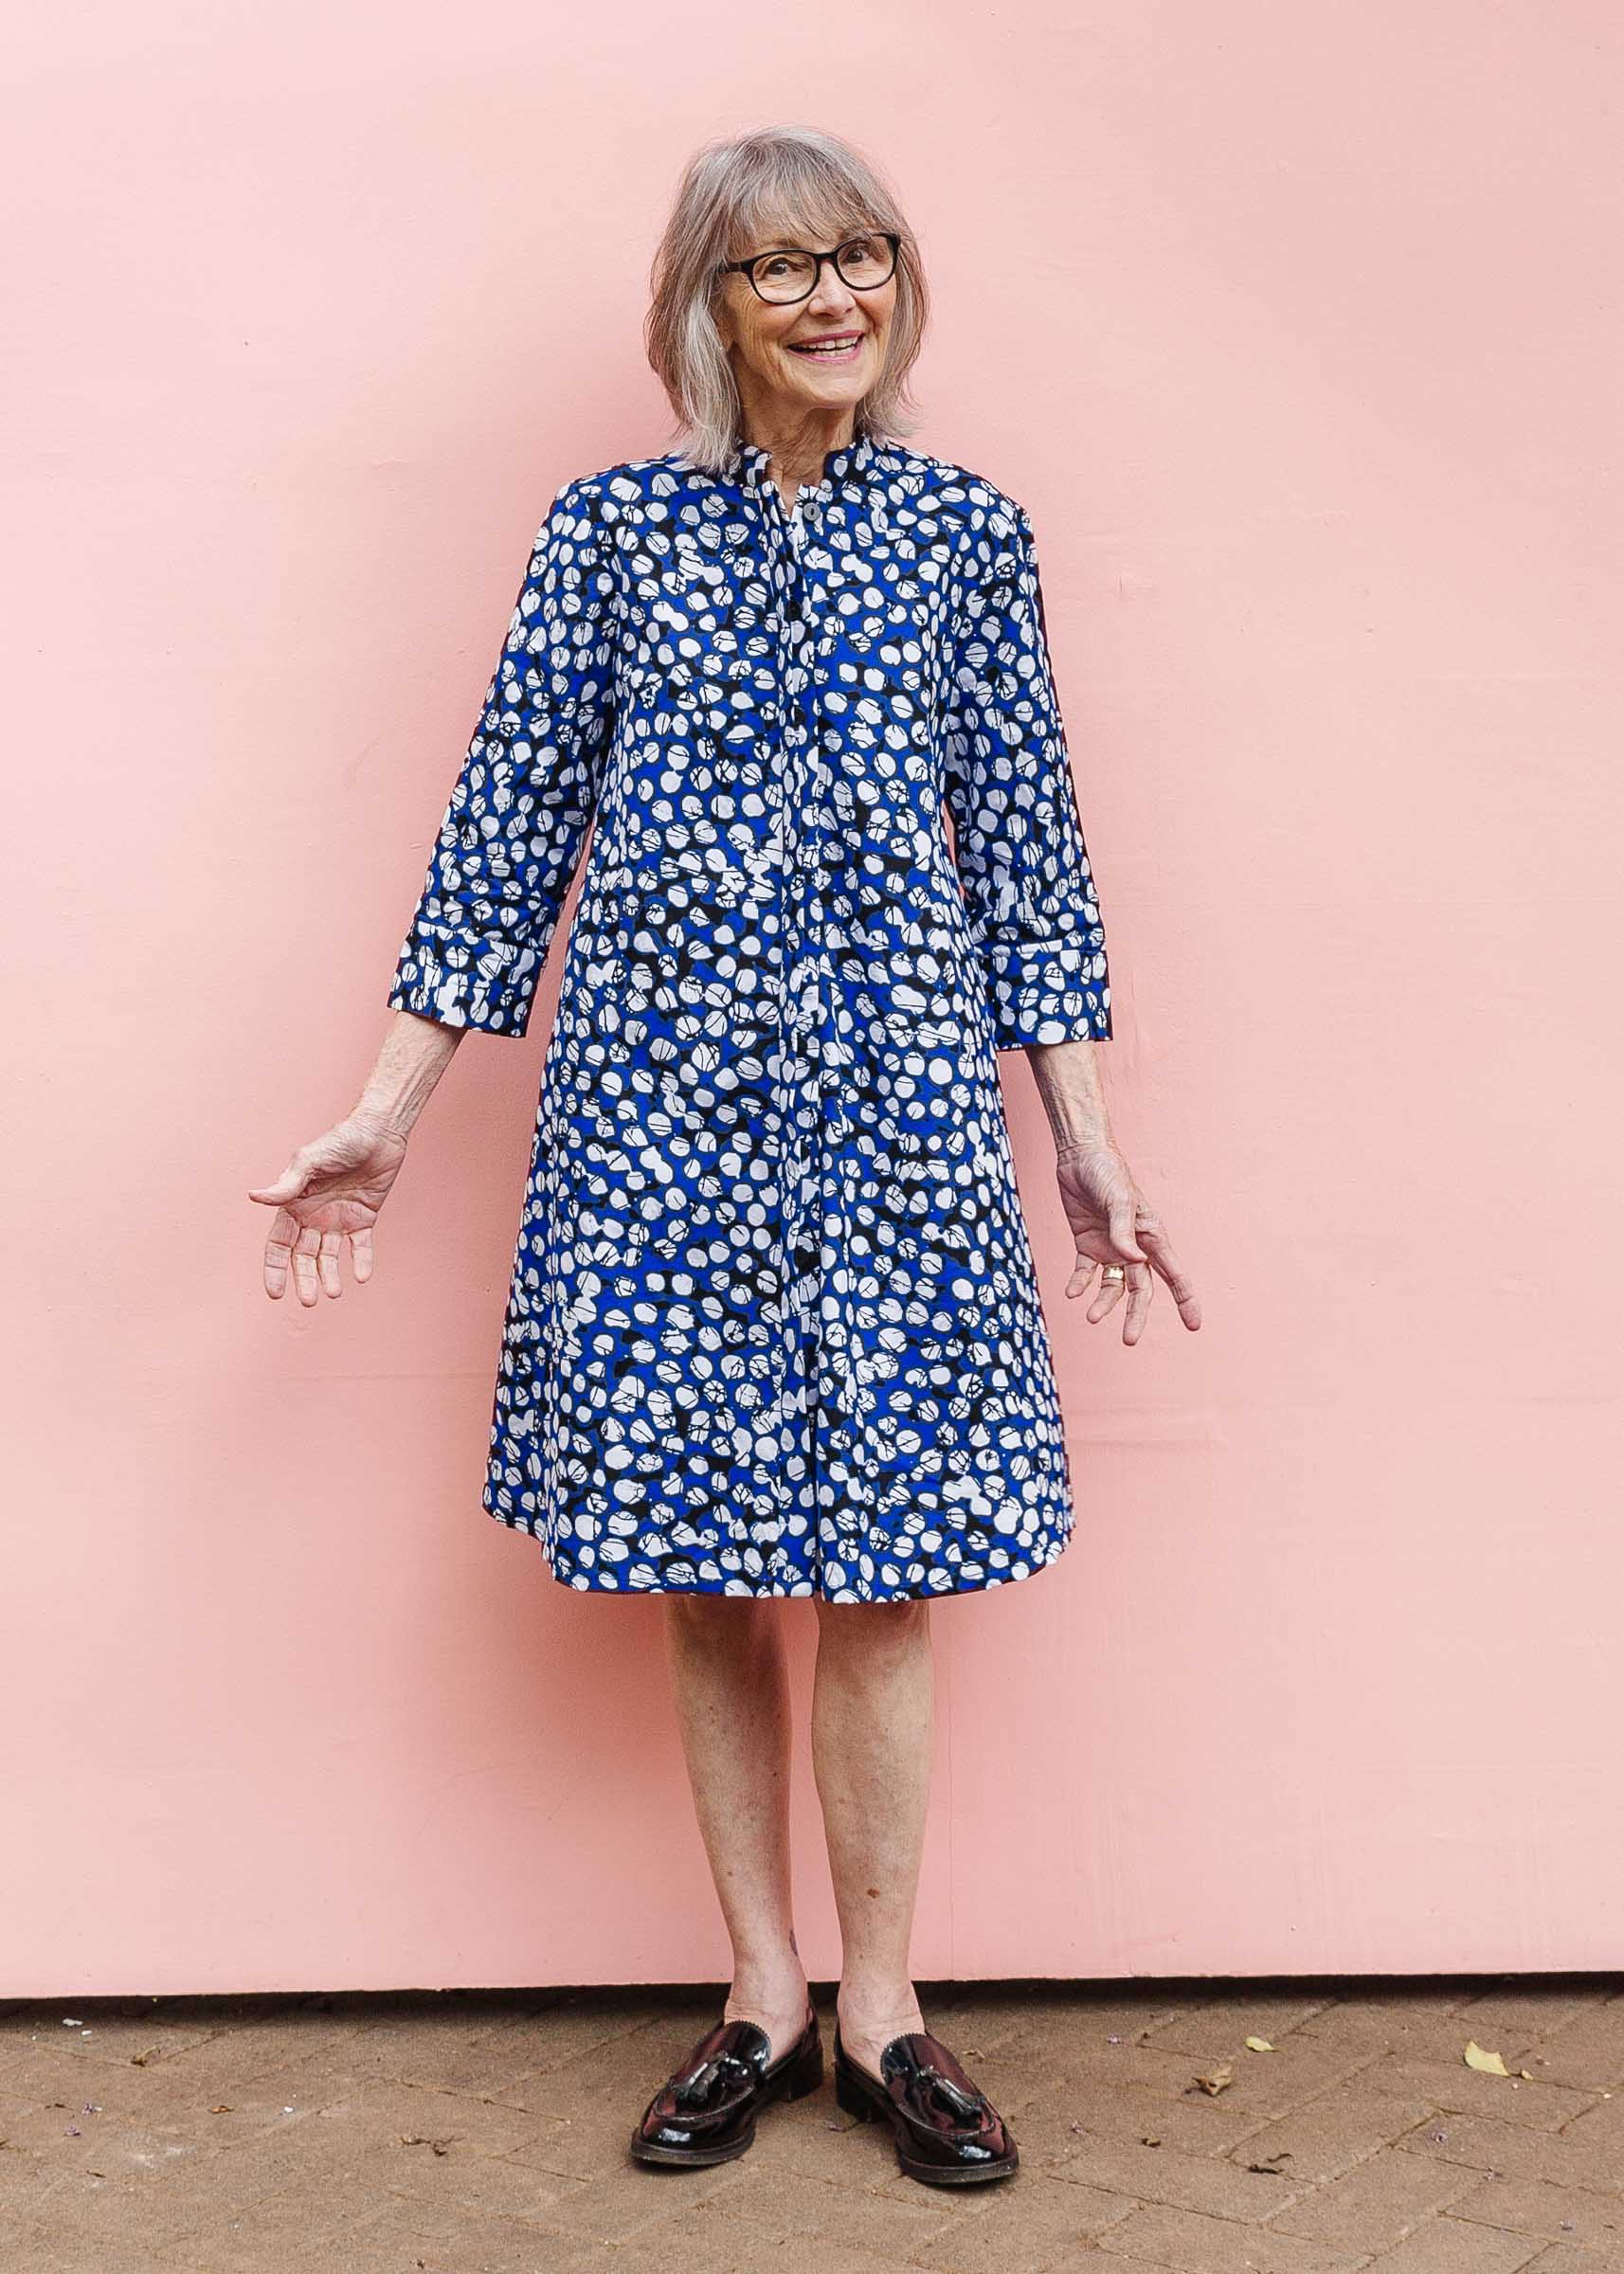 Model wearing blue dress with black and white abstract dots